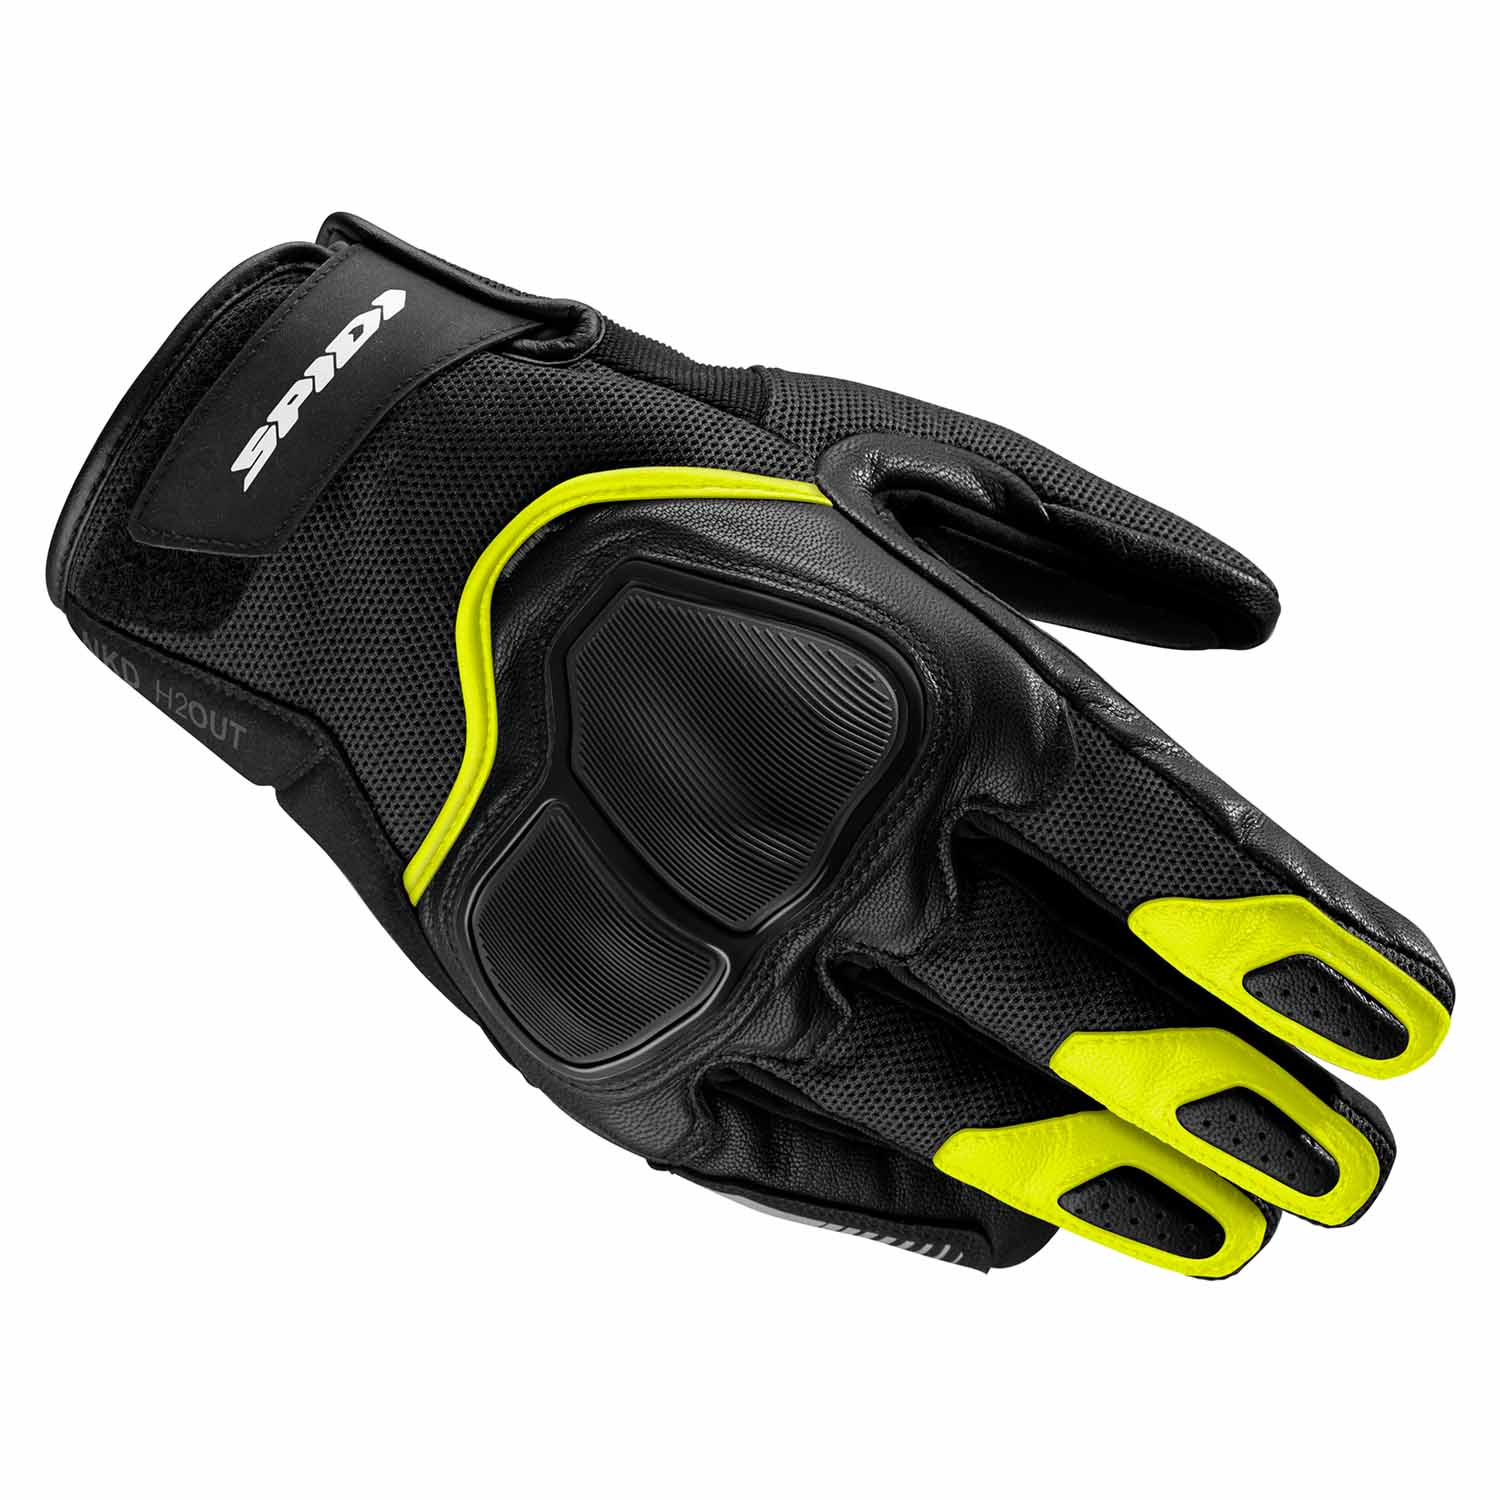 Image of Spidi NKD H2OUT Gloves Yellow Fluo Size 2XL ID 8030161496741